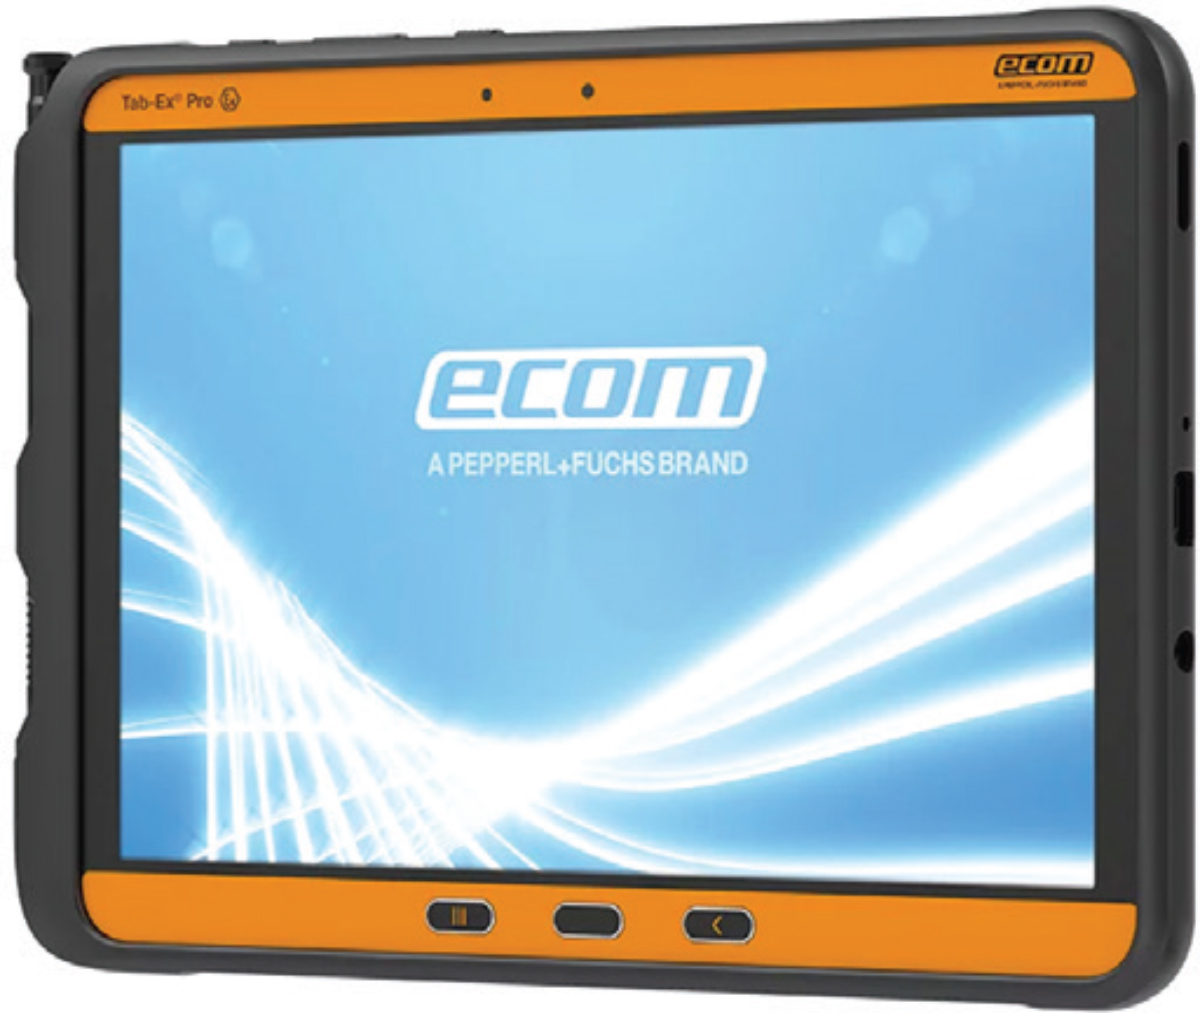 Tablet Is Certified for Use in Hazardous Areas